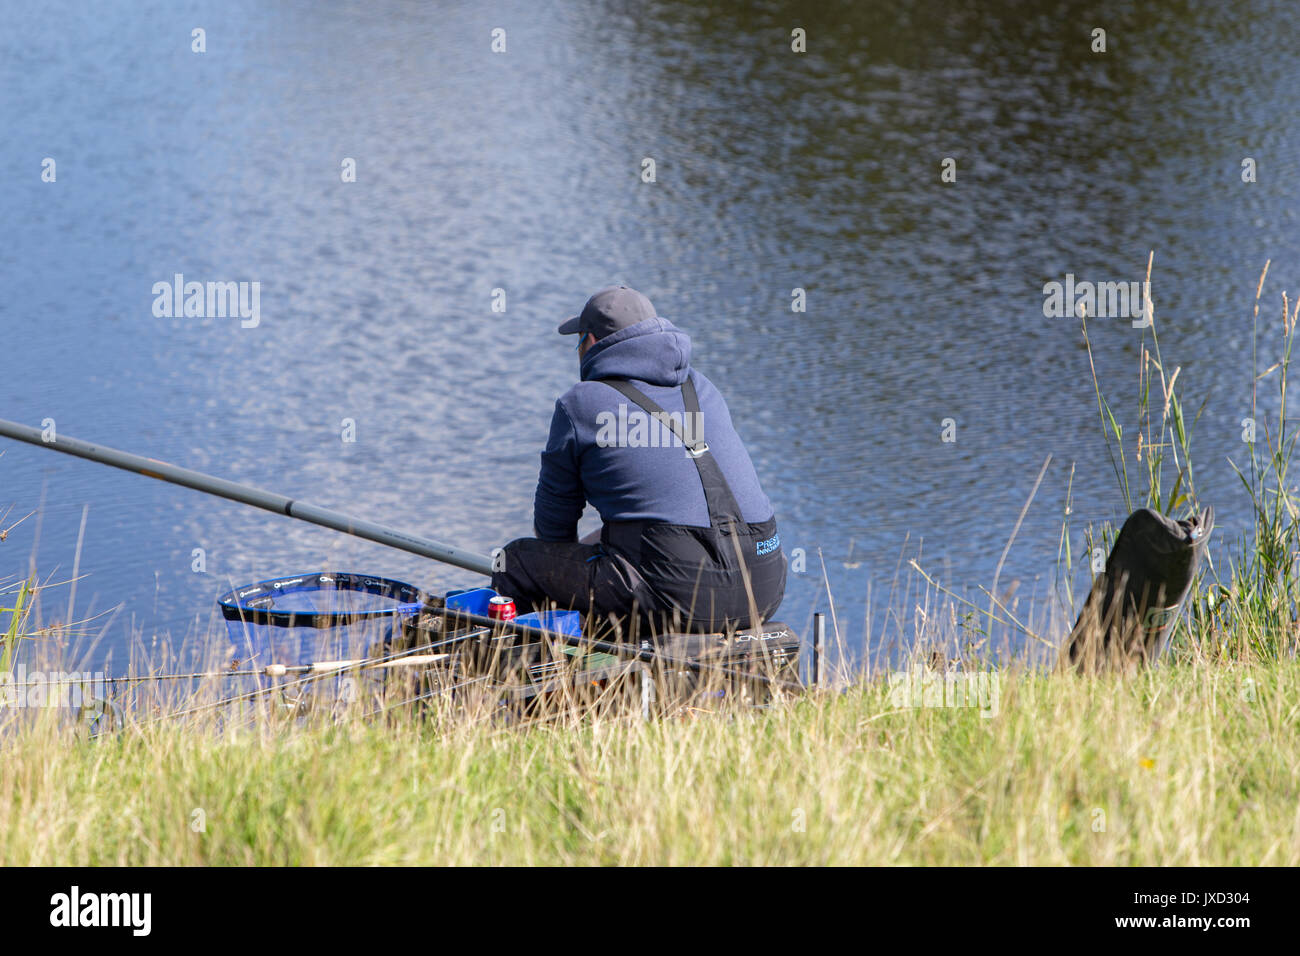 Anglers fishing at a Mill Pond in The Lancashire Hills Stock Photo